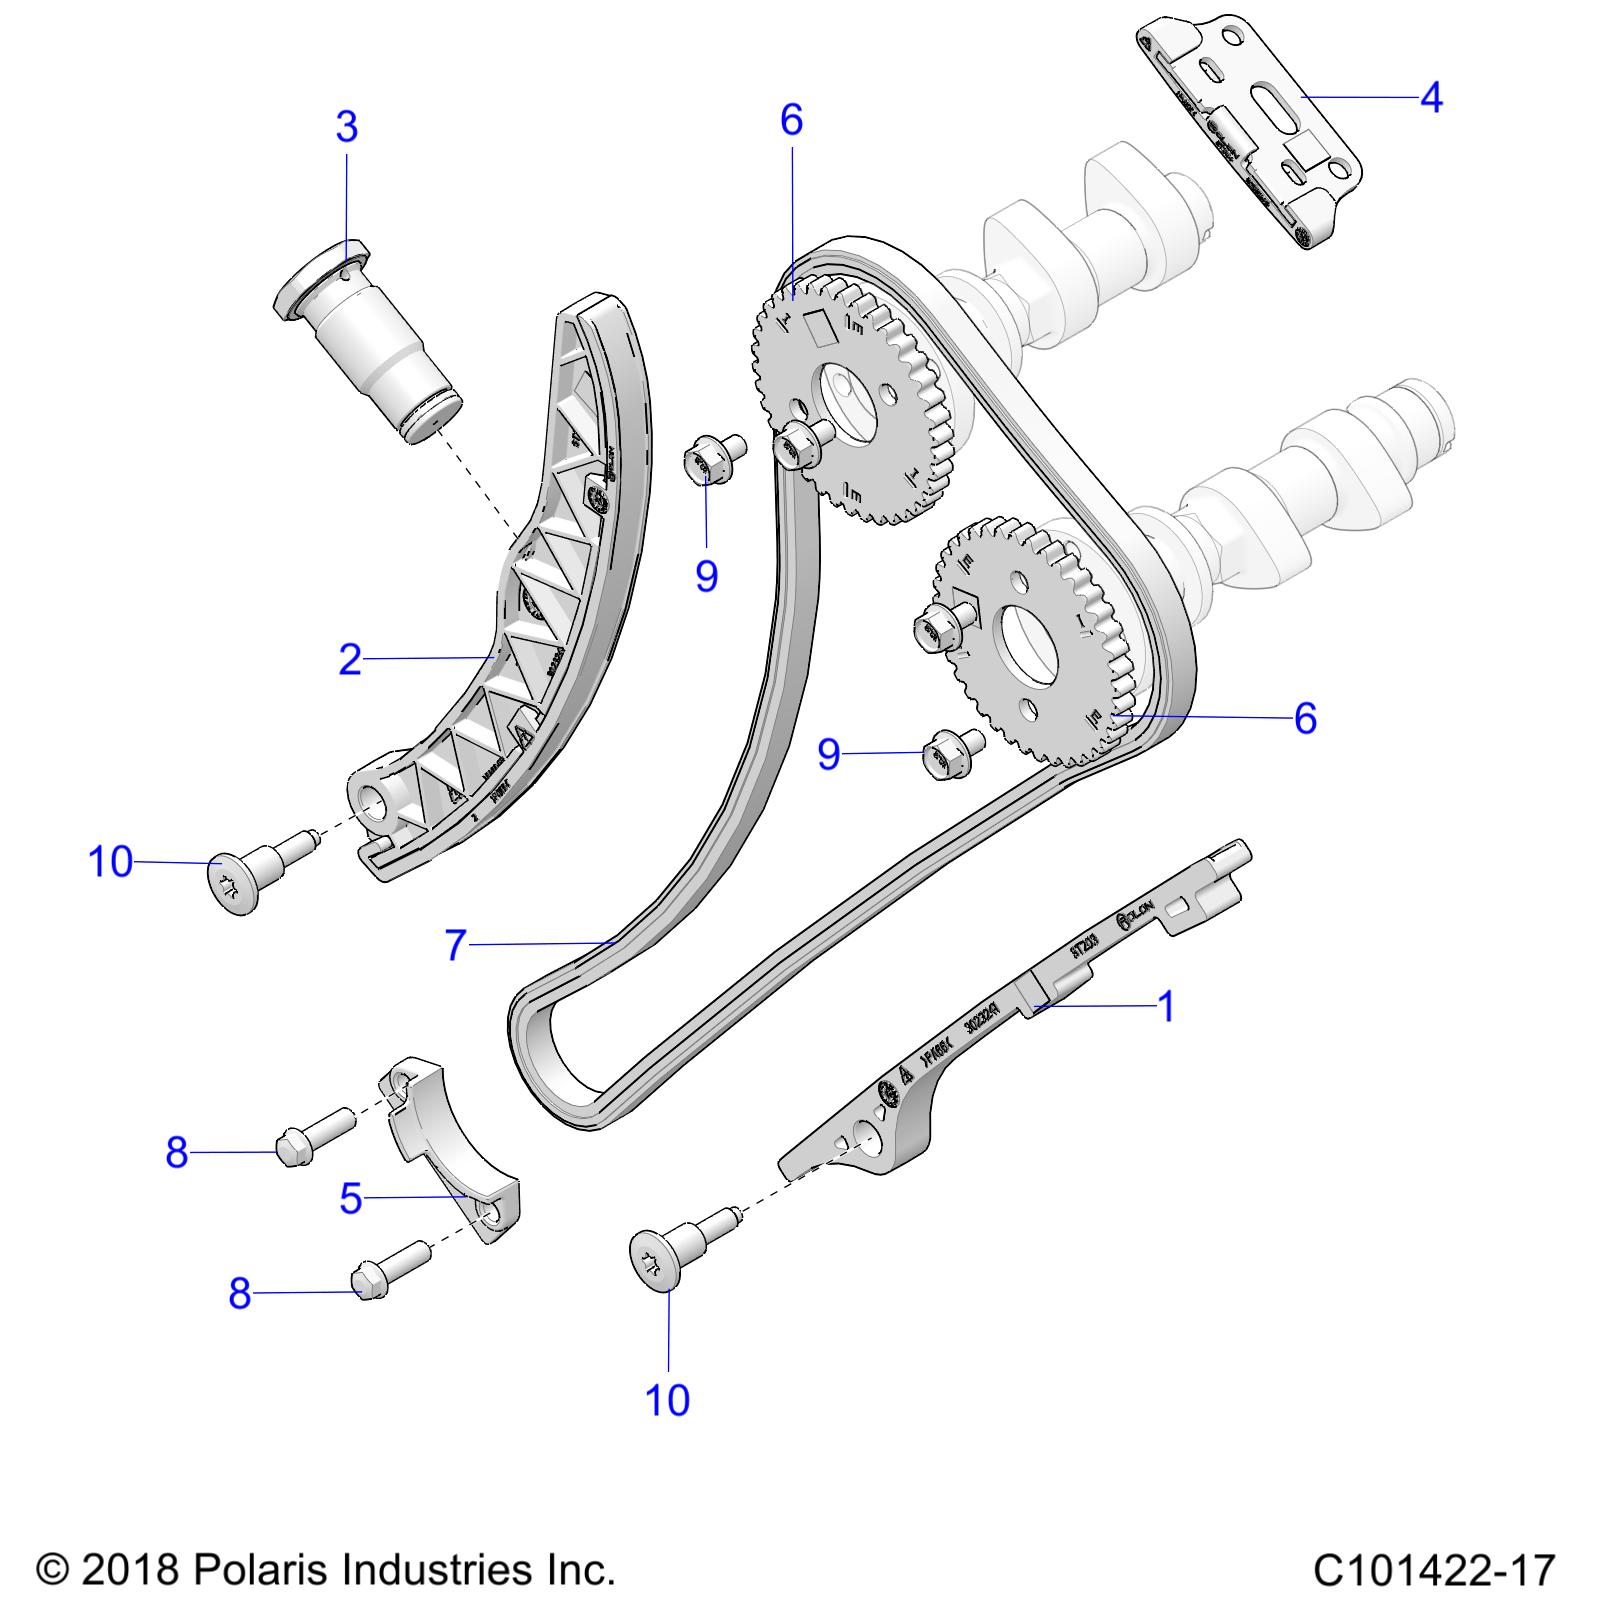 ENGINE, CAM CHAIN and SPROCKET - A19SWS57P1/P2 (C101422-17)